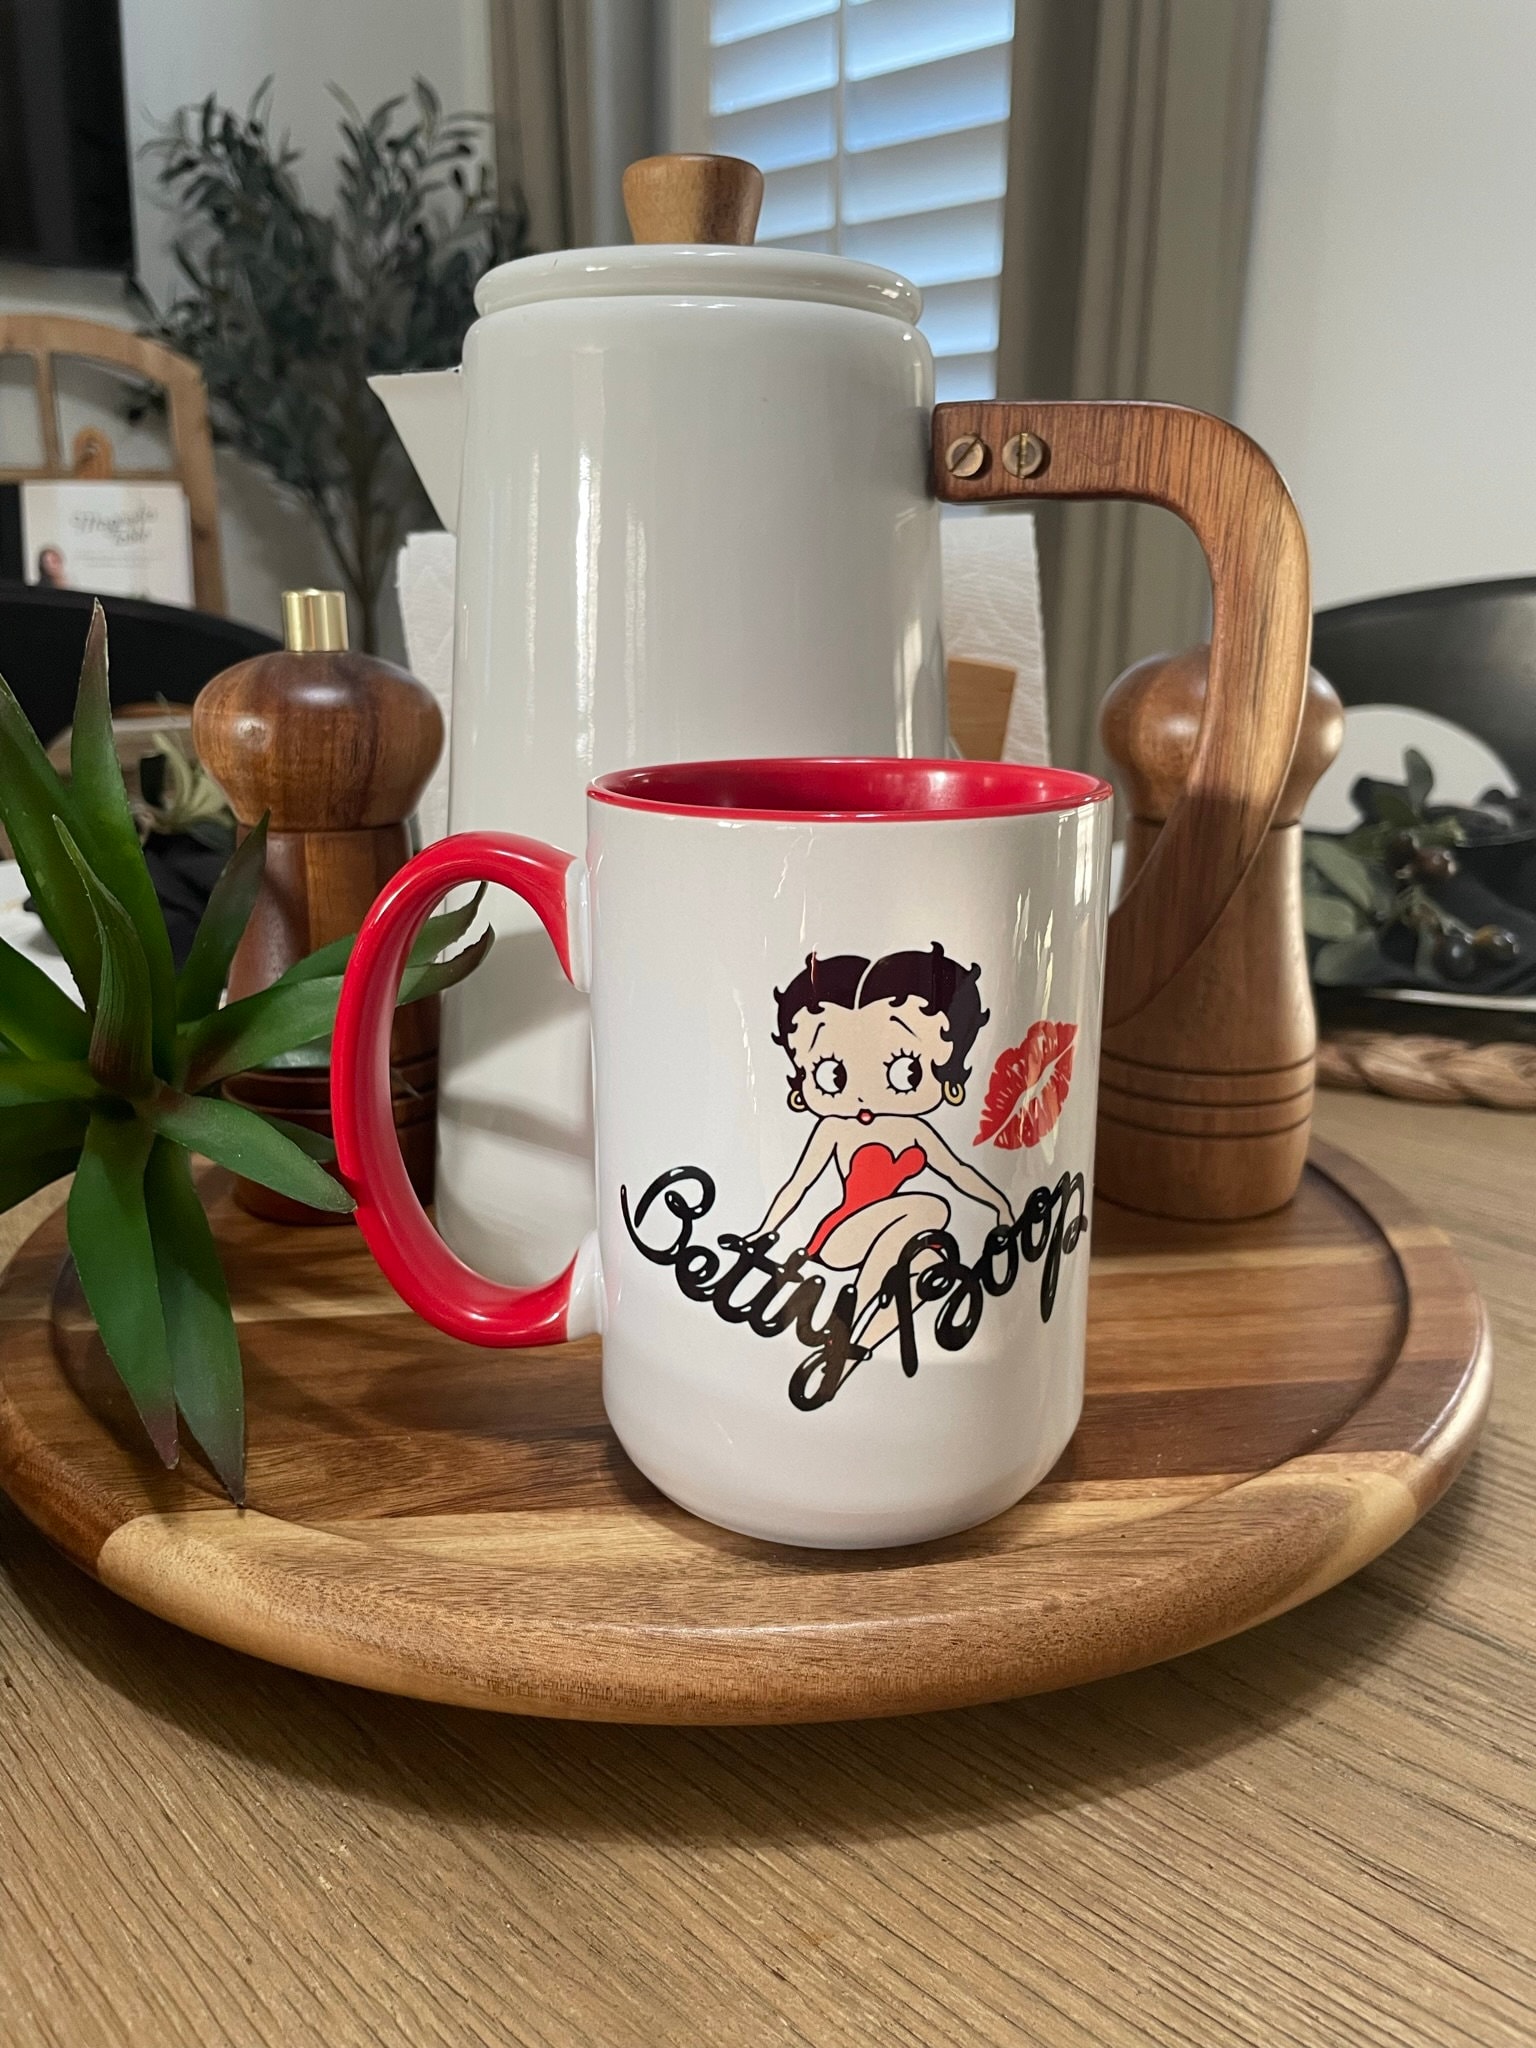 Betty Boop 2006 Collectable Larger 4.75 Coffee Cup / Tea Mug